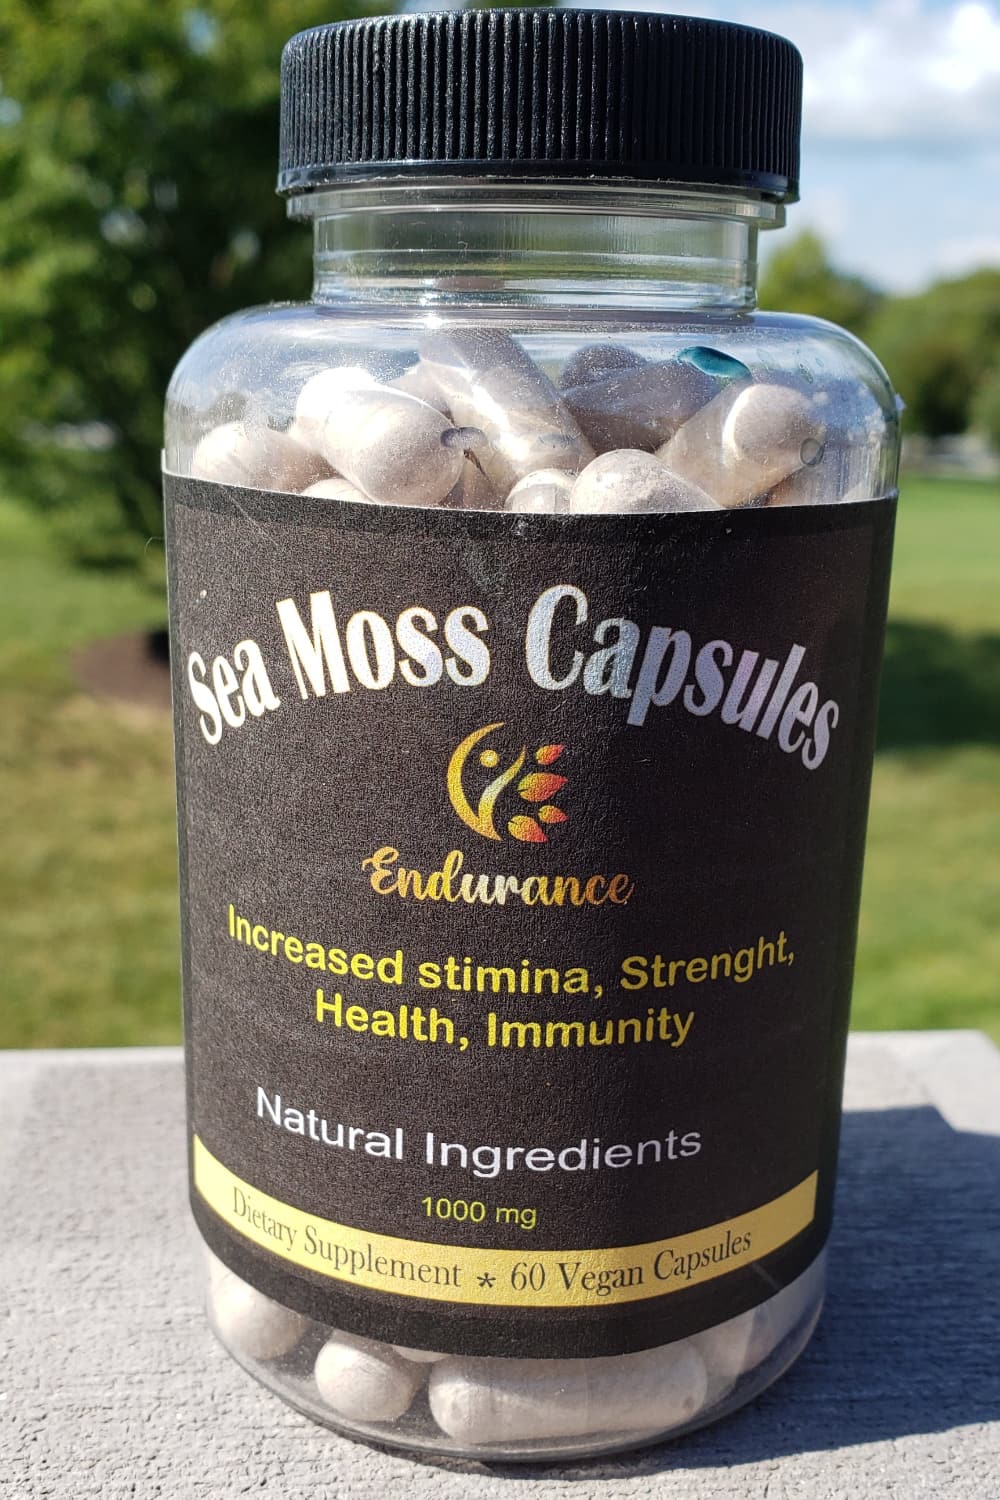 Sea moss supplements include these easy to take sea moss capsules.